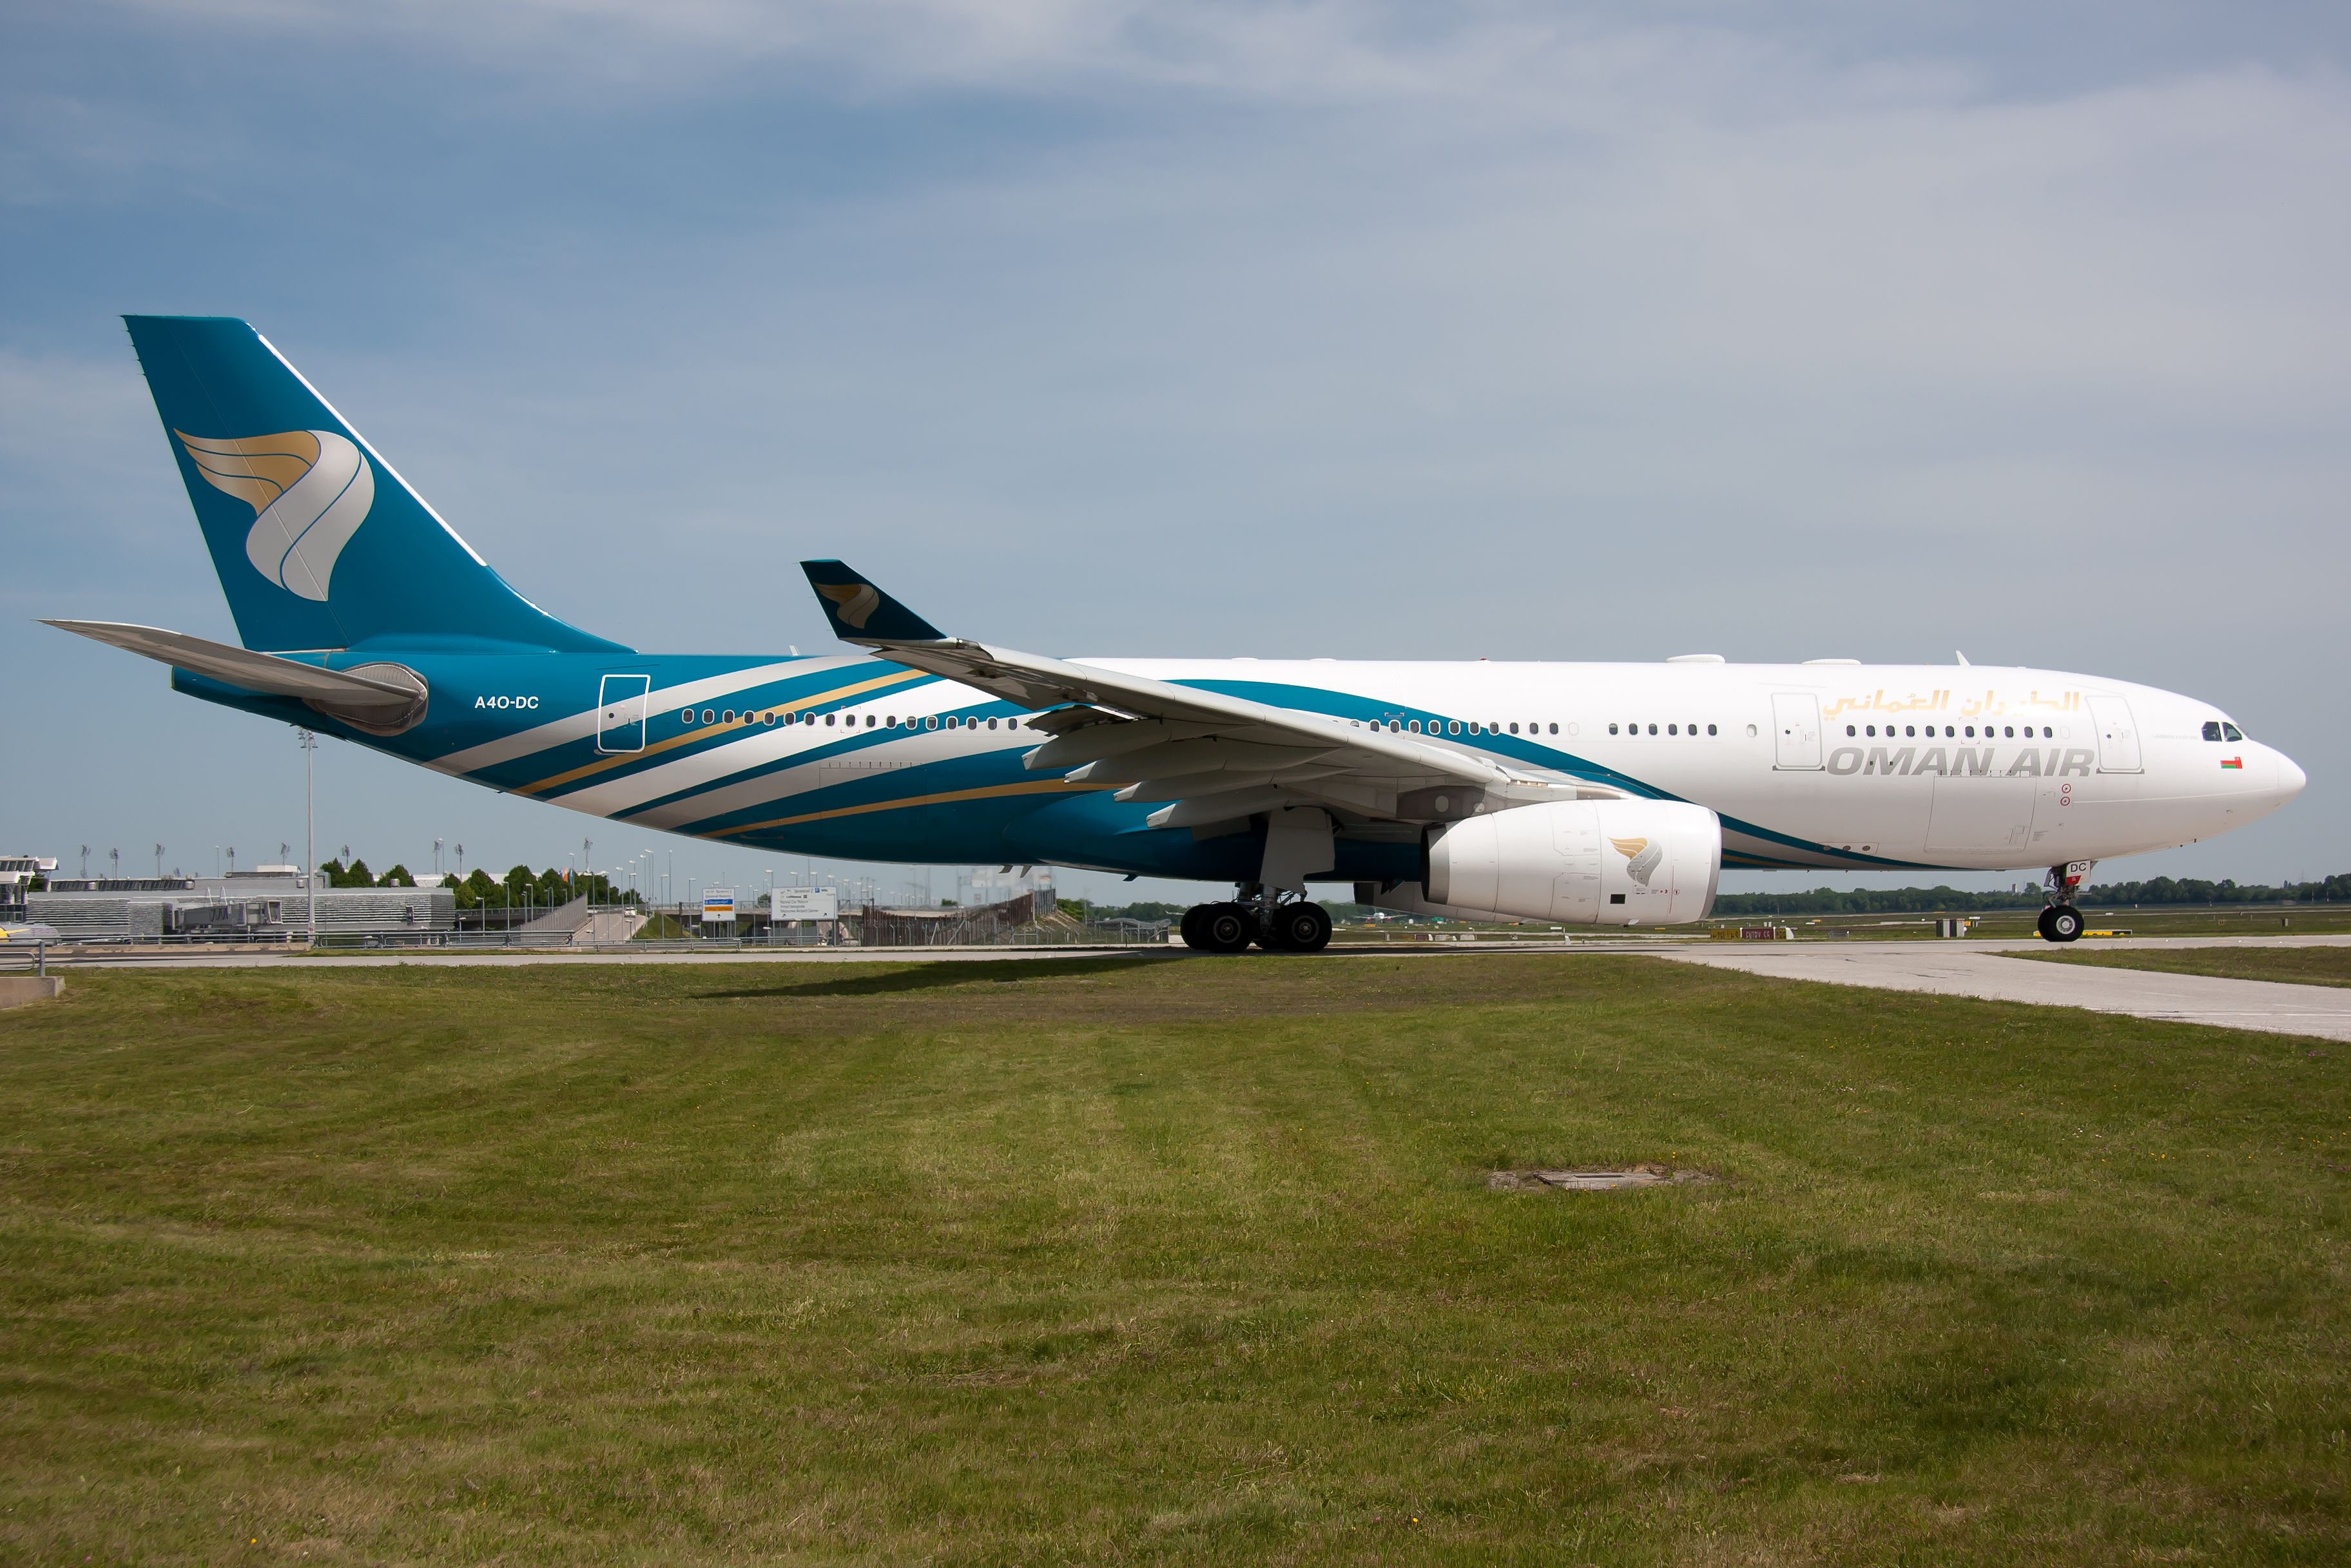 GettyImages-1217233097 Oman Air Airbus A330